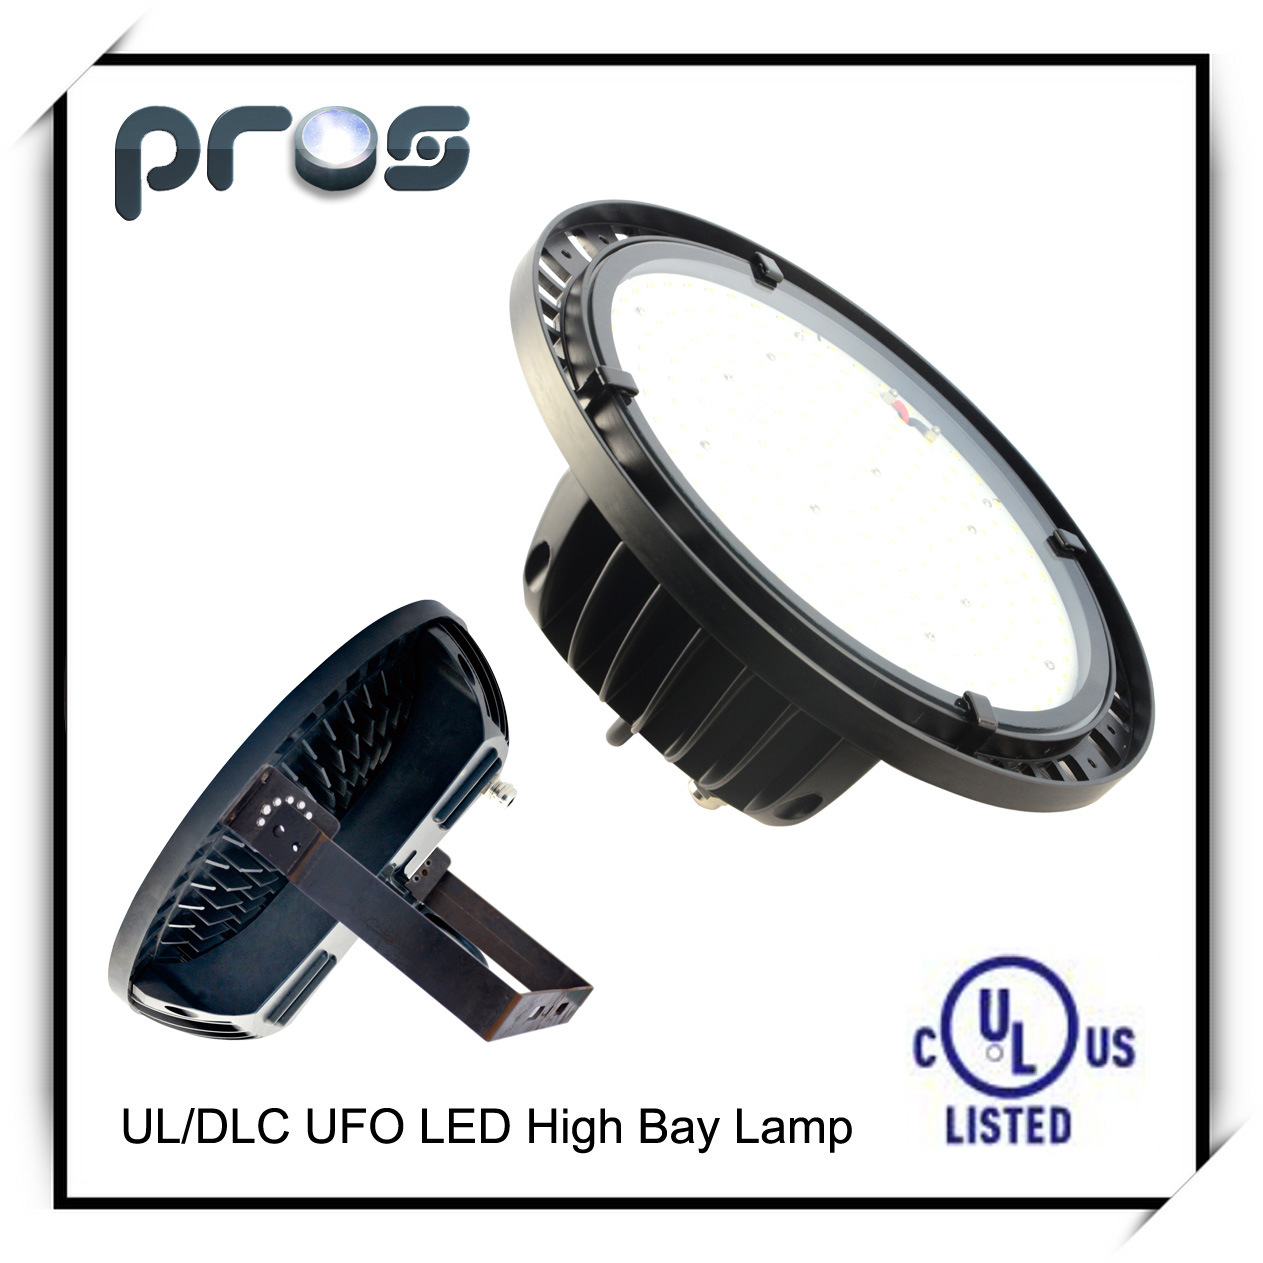 180W UFO LED High Bay Light with TUV Listed